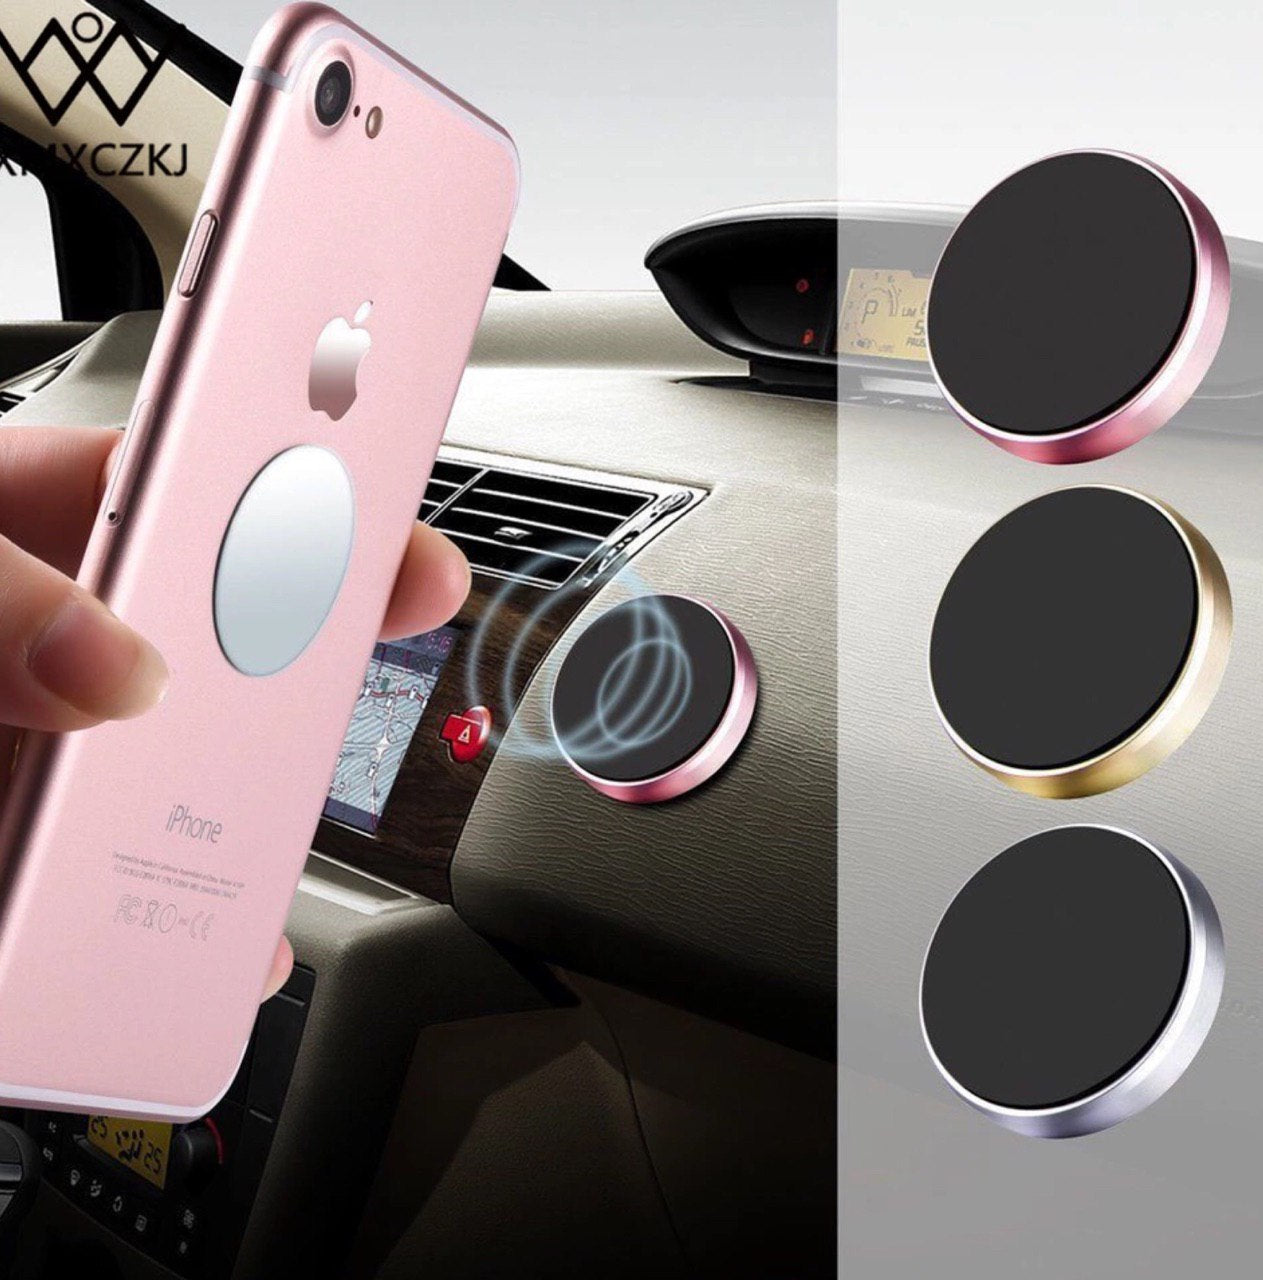 *** PAIR *** Magnetic Phone Holder for iPhone, Samsung (BLACK + SILVER)